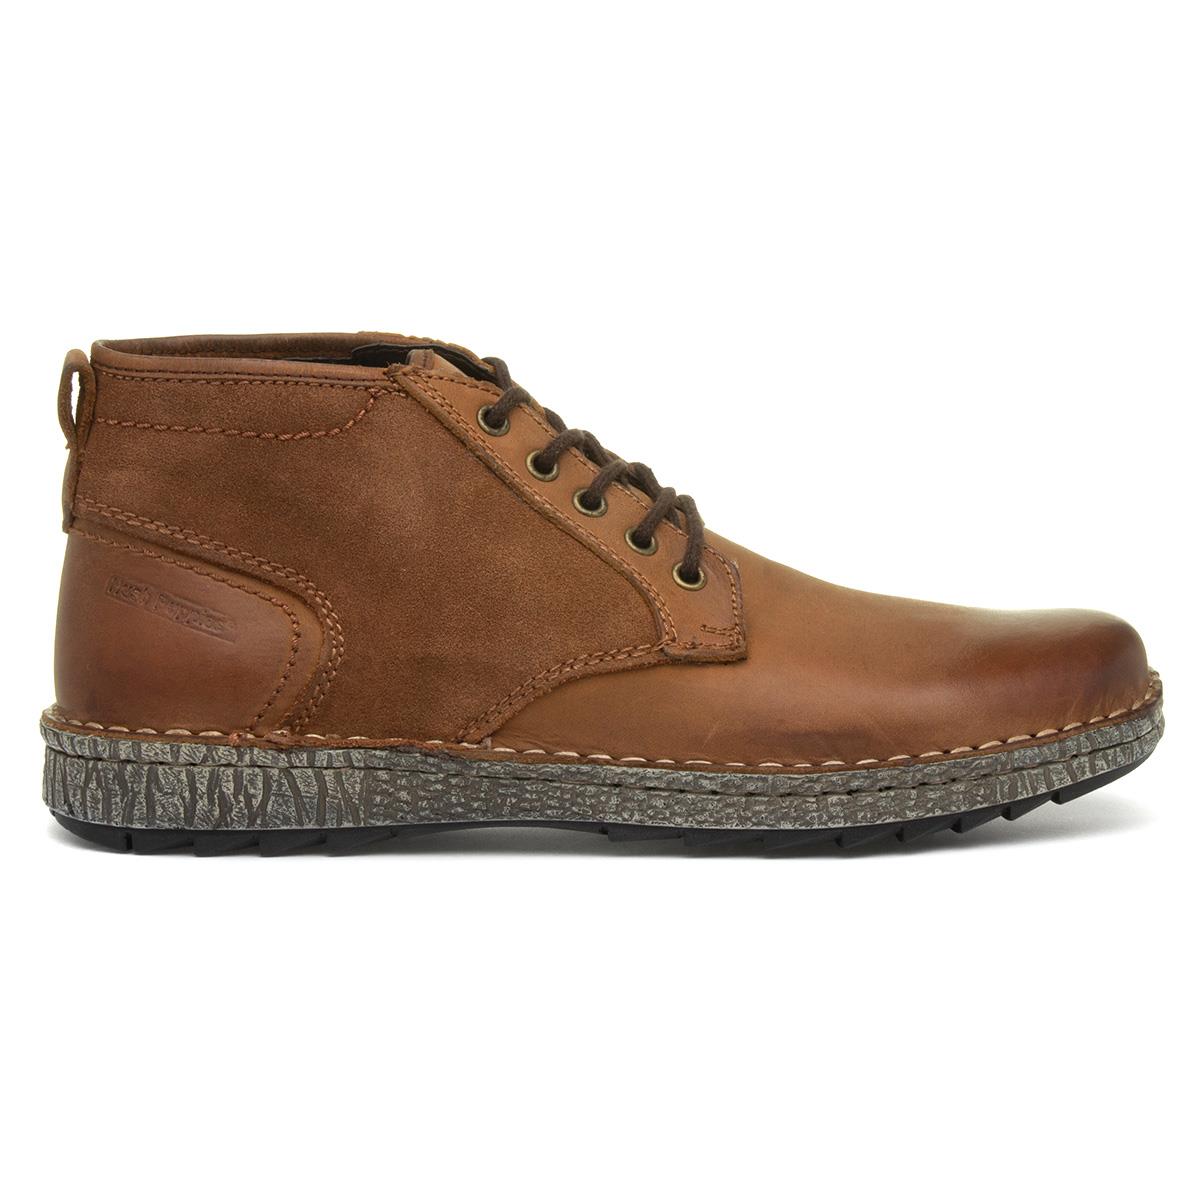 Hush Puppies Gus Tan Lace Up Boot-58601 | Shoe Zone